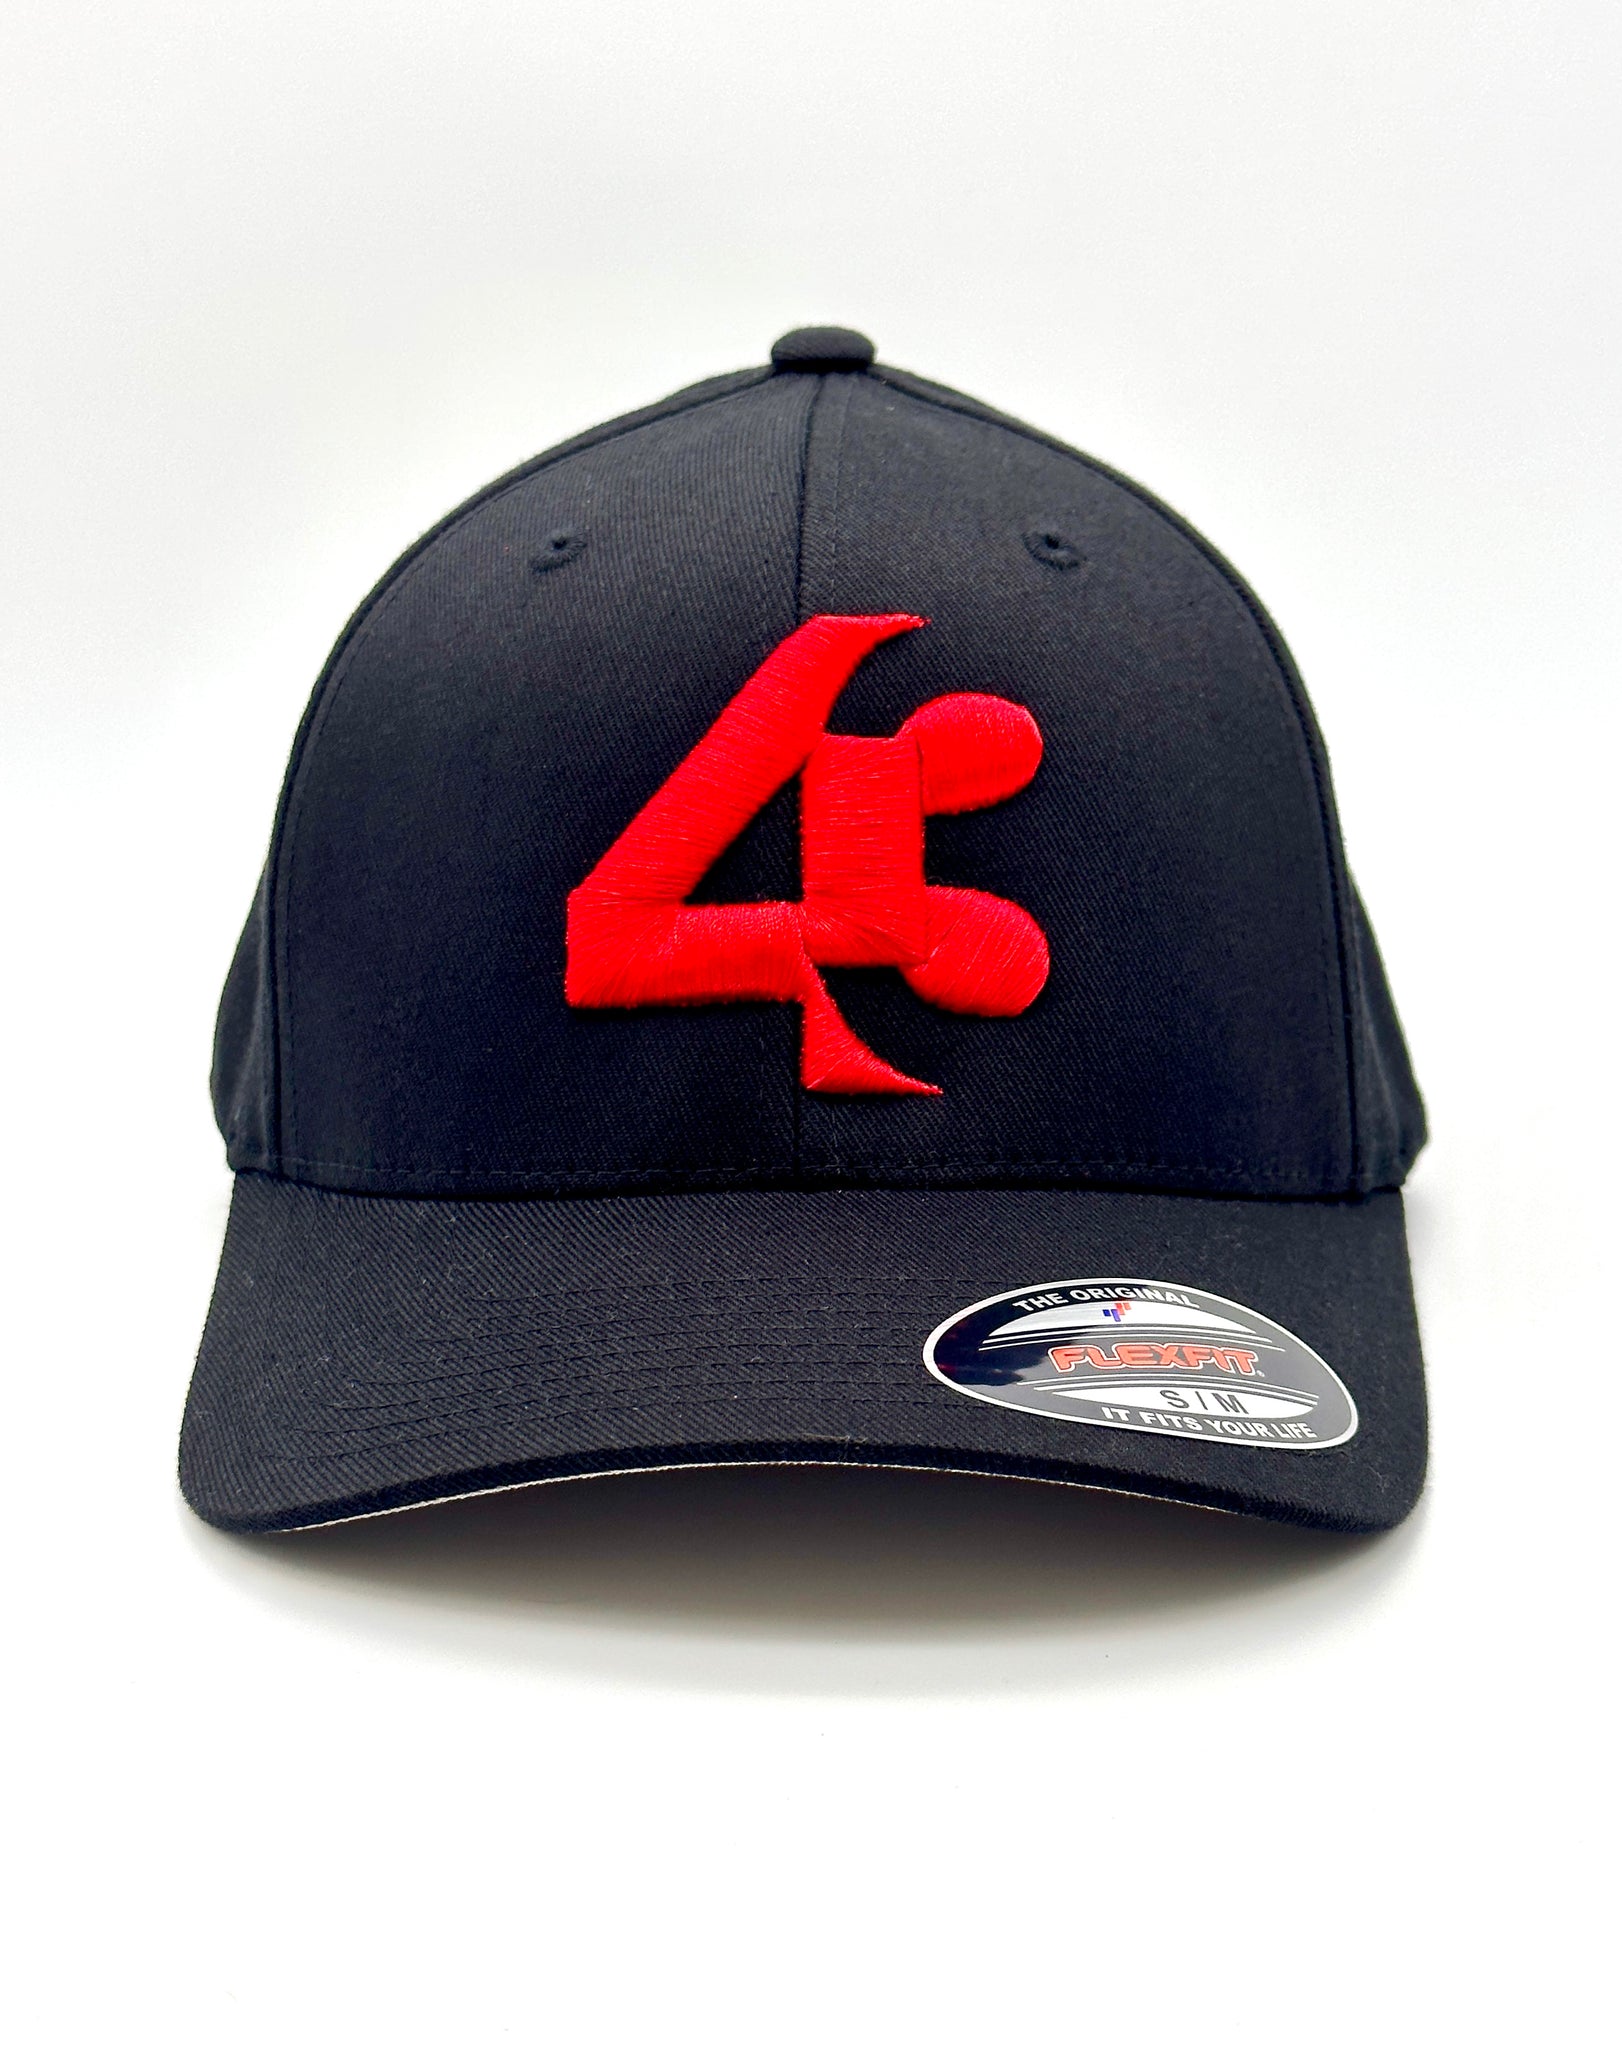 Black – red Flexfit® with USA Fitted FortyThree™ 43 emblem